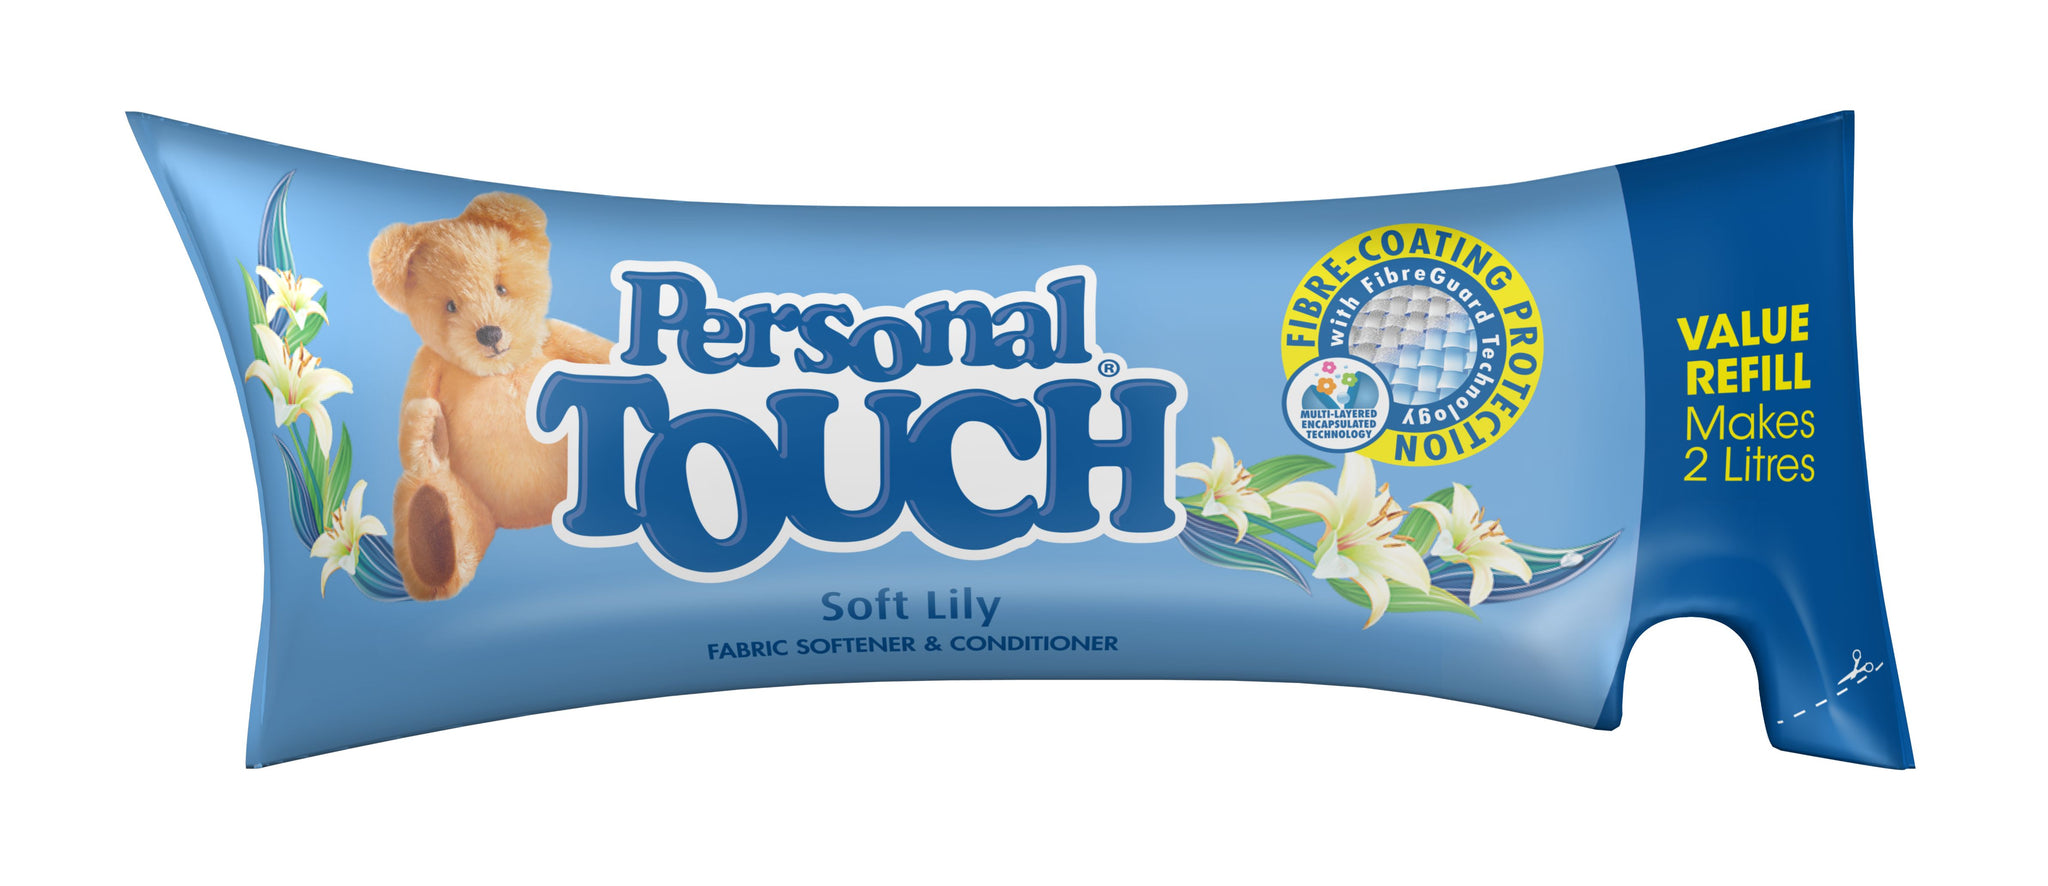 Personal Touch Refill - Soft Lily - 500ml